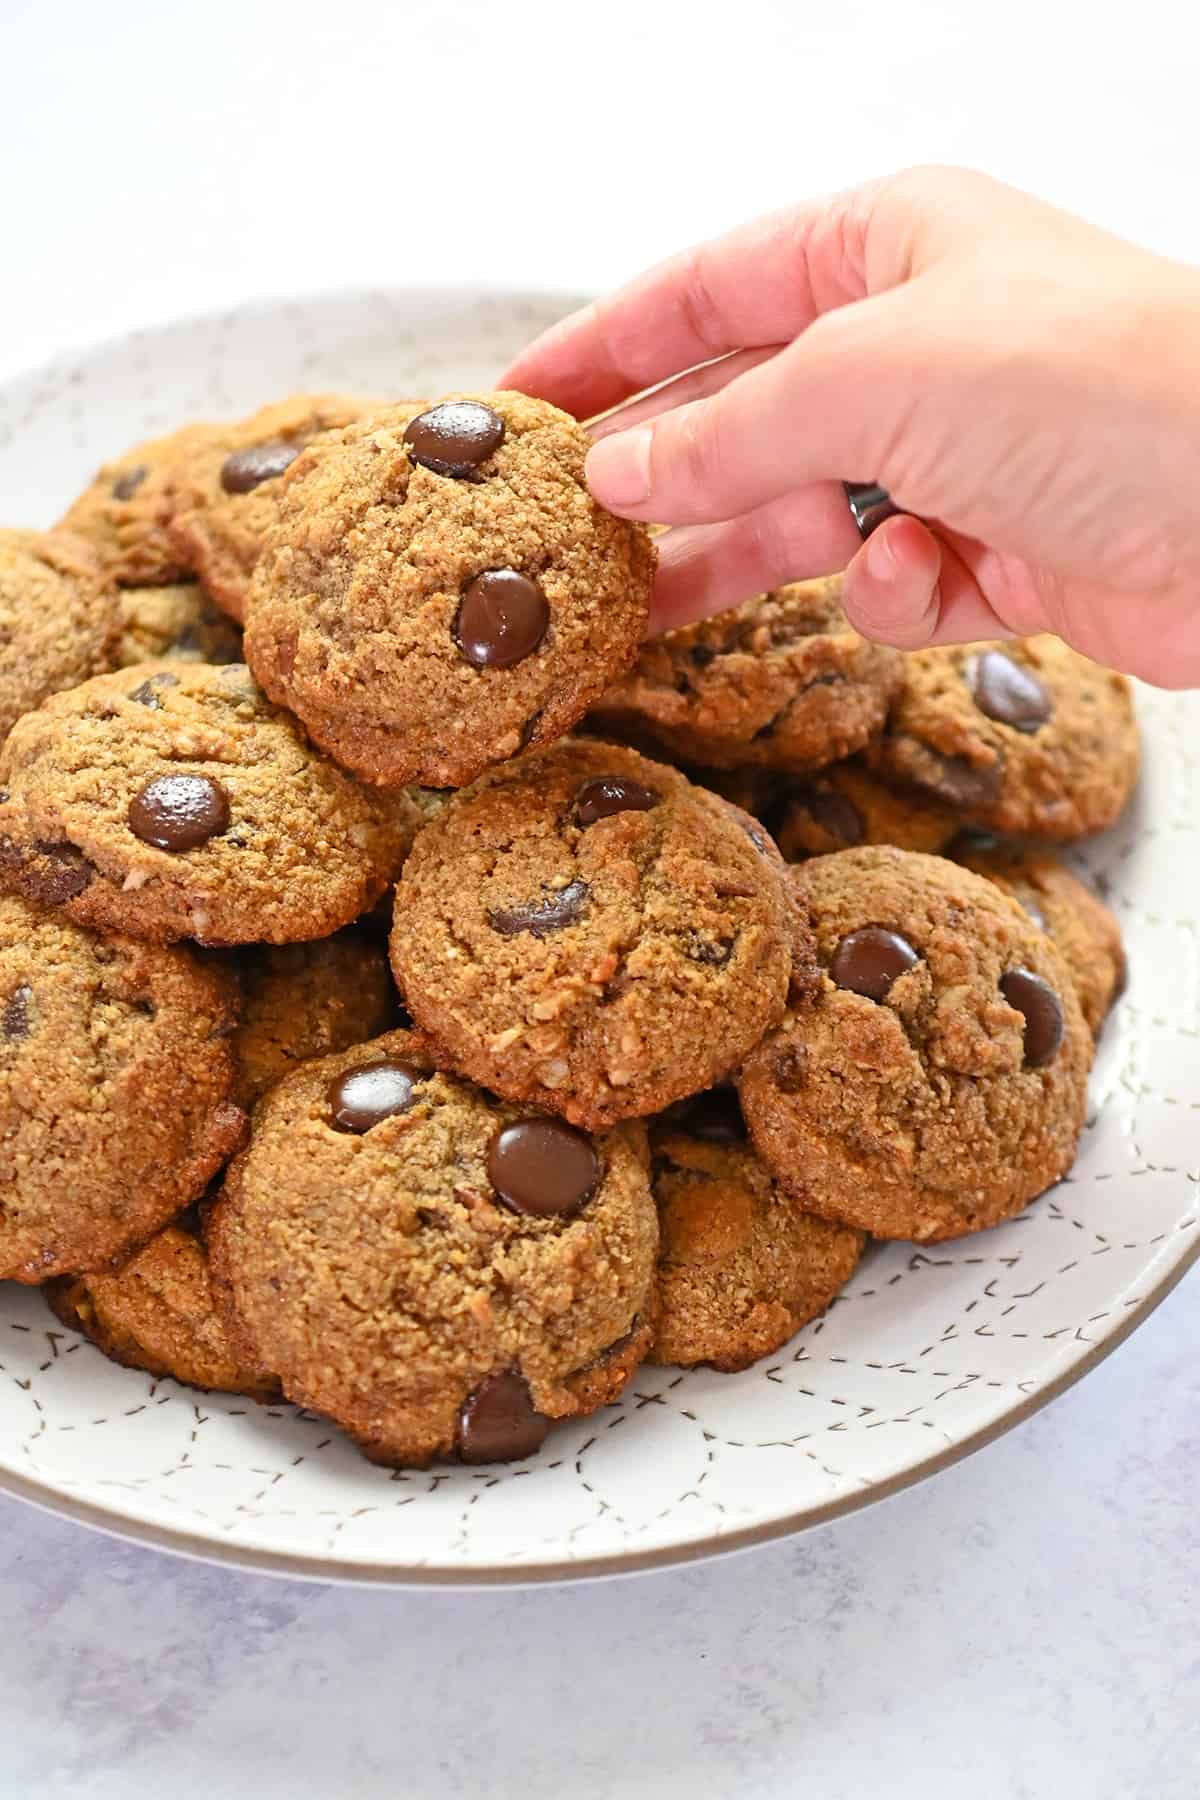 A hand is grabbing a paleo banana chocolate chip cookie from a white plate piled hight with cookies.